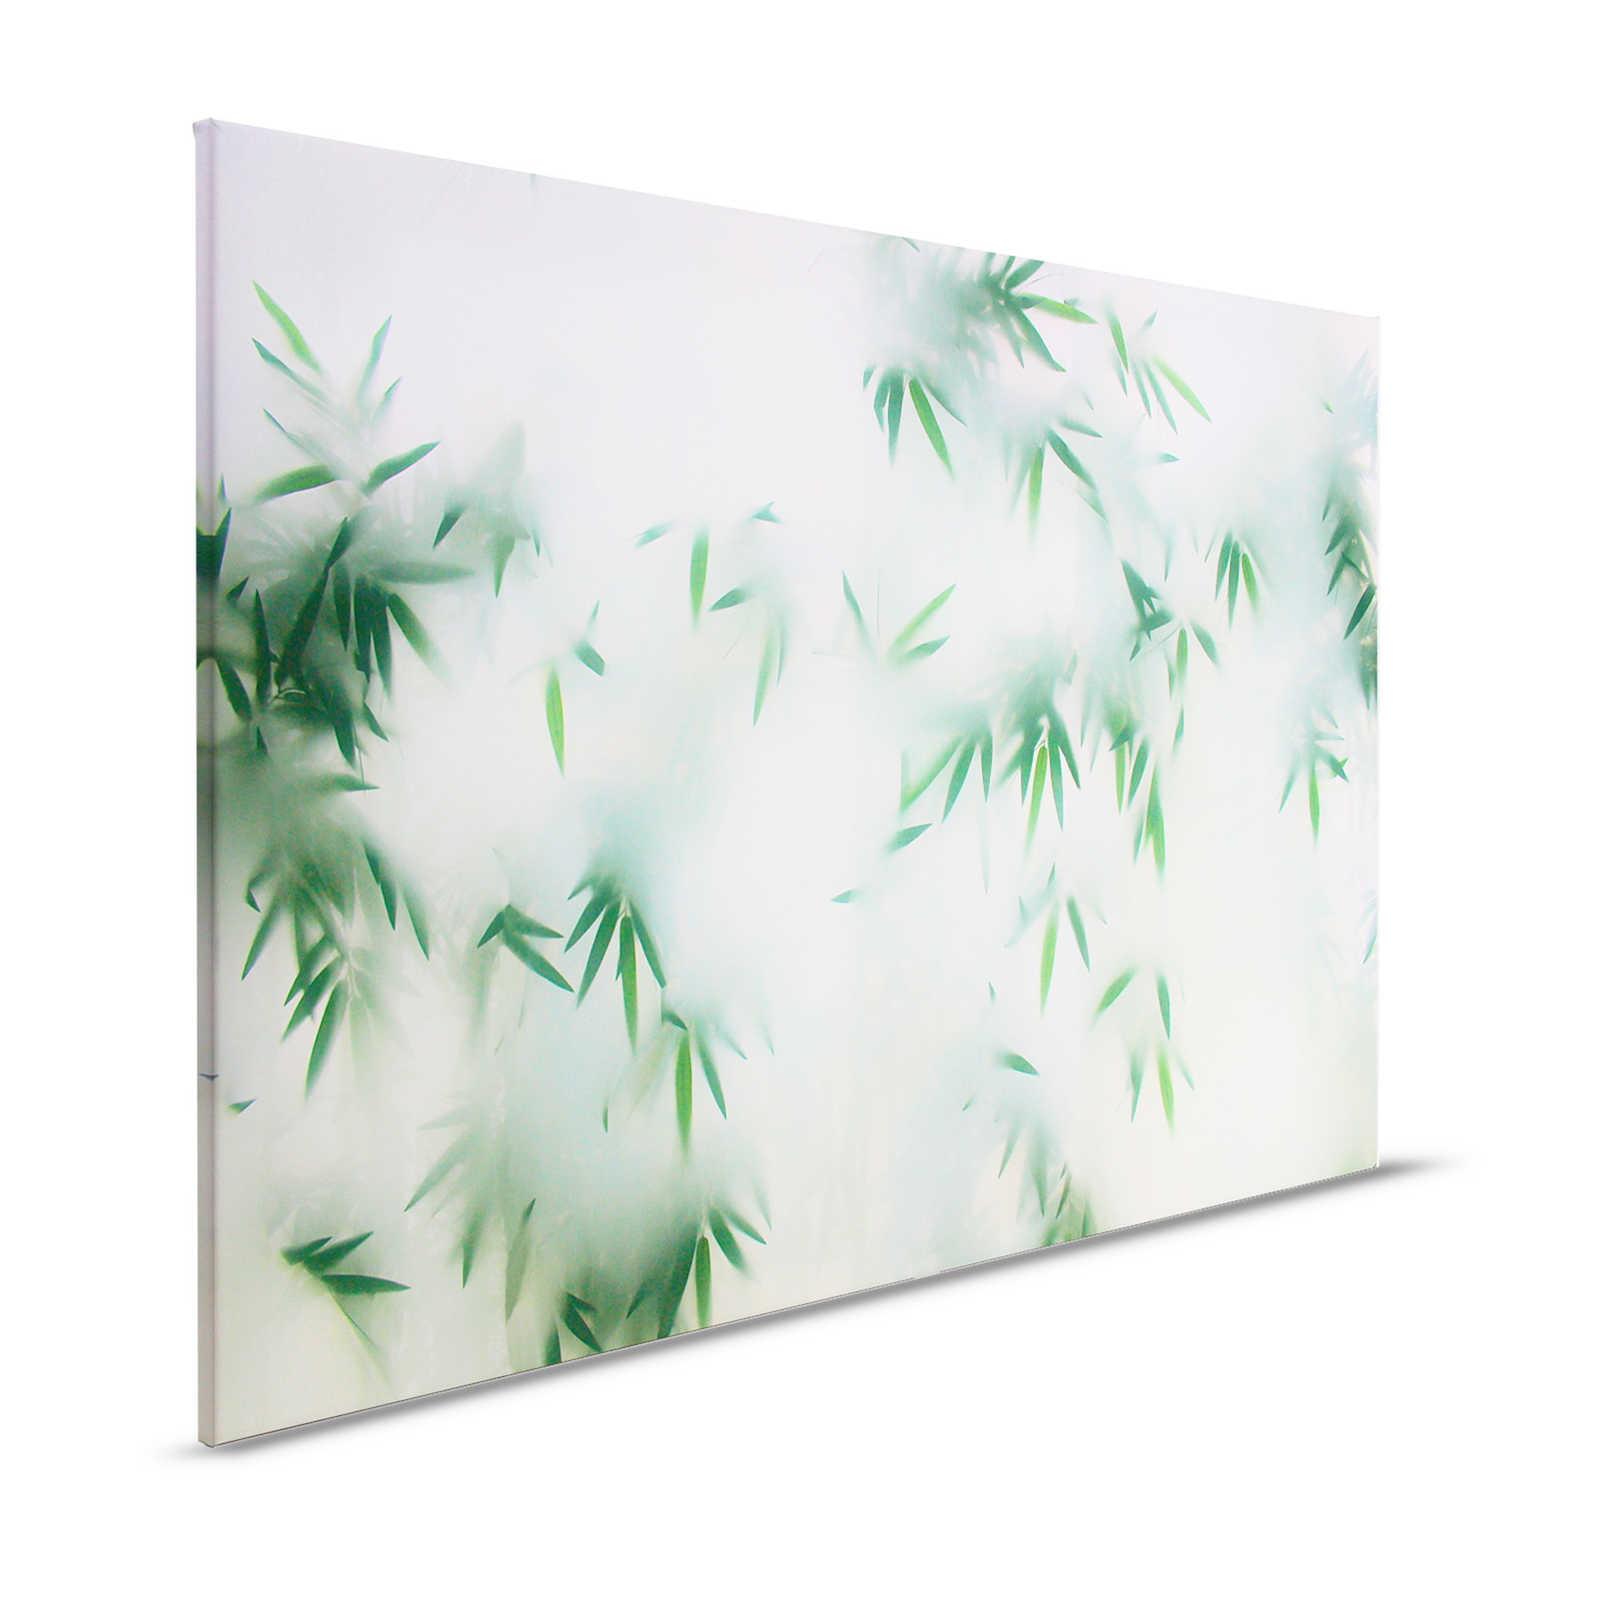 Panda Paradise 3 - Leaves Canvas painting Bamboo in the mist - 1.20 m x 0.80 m
